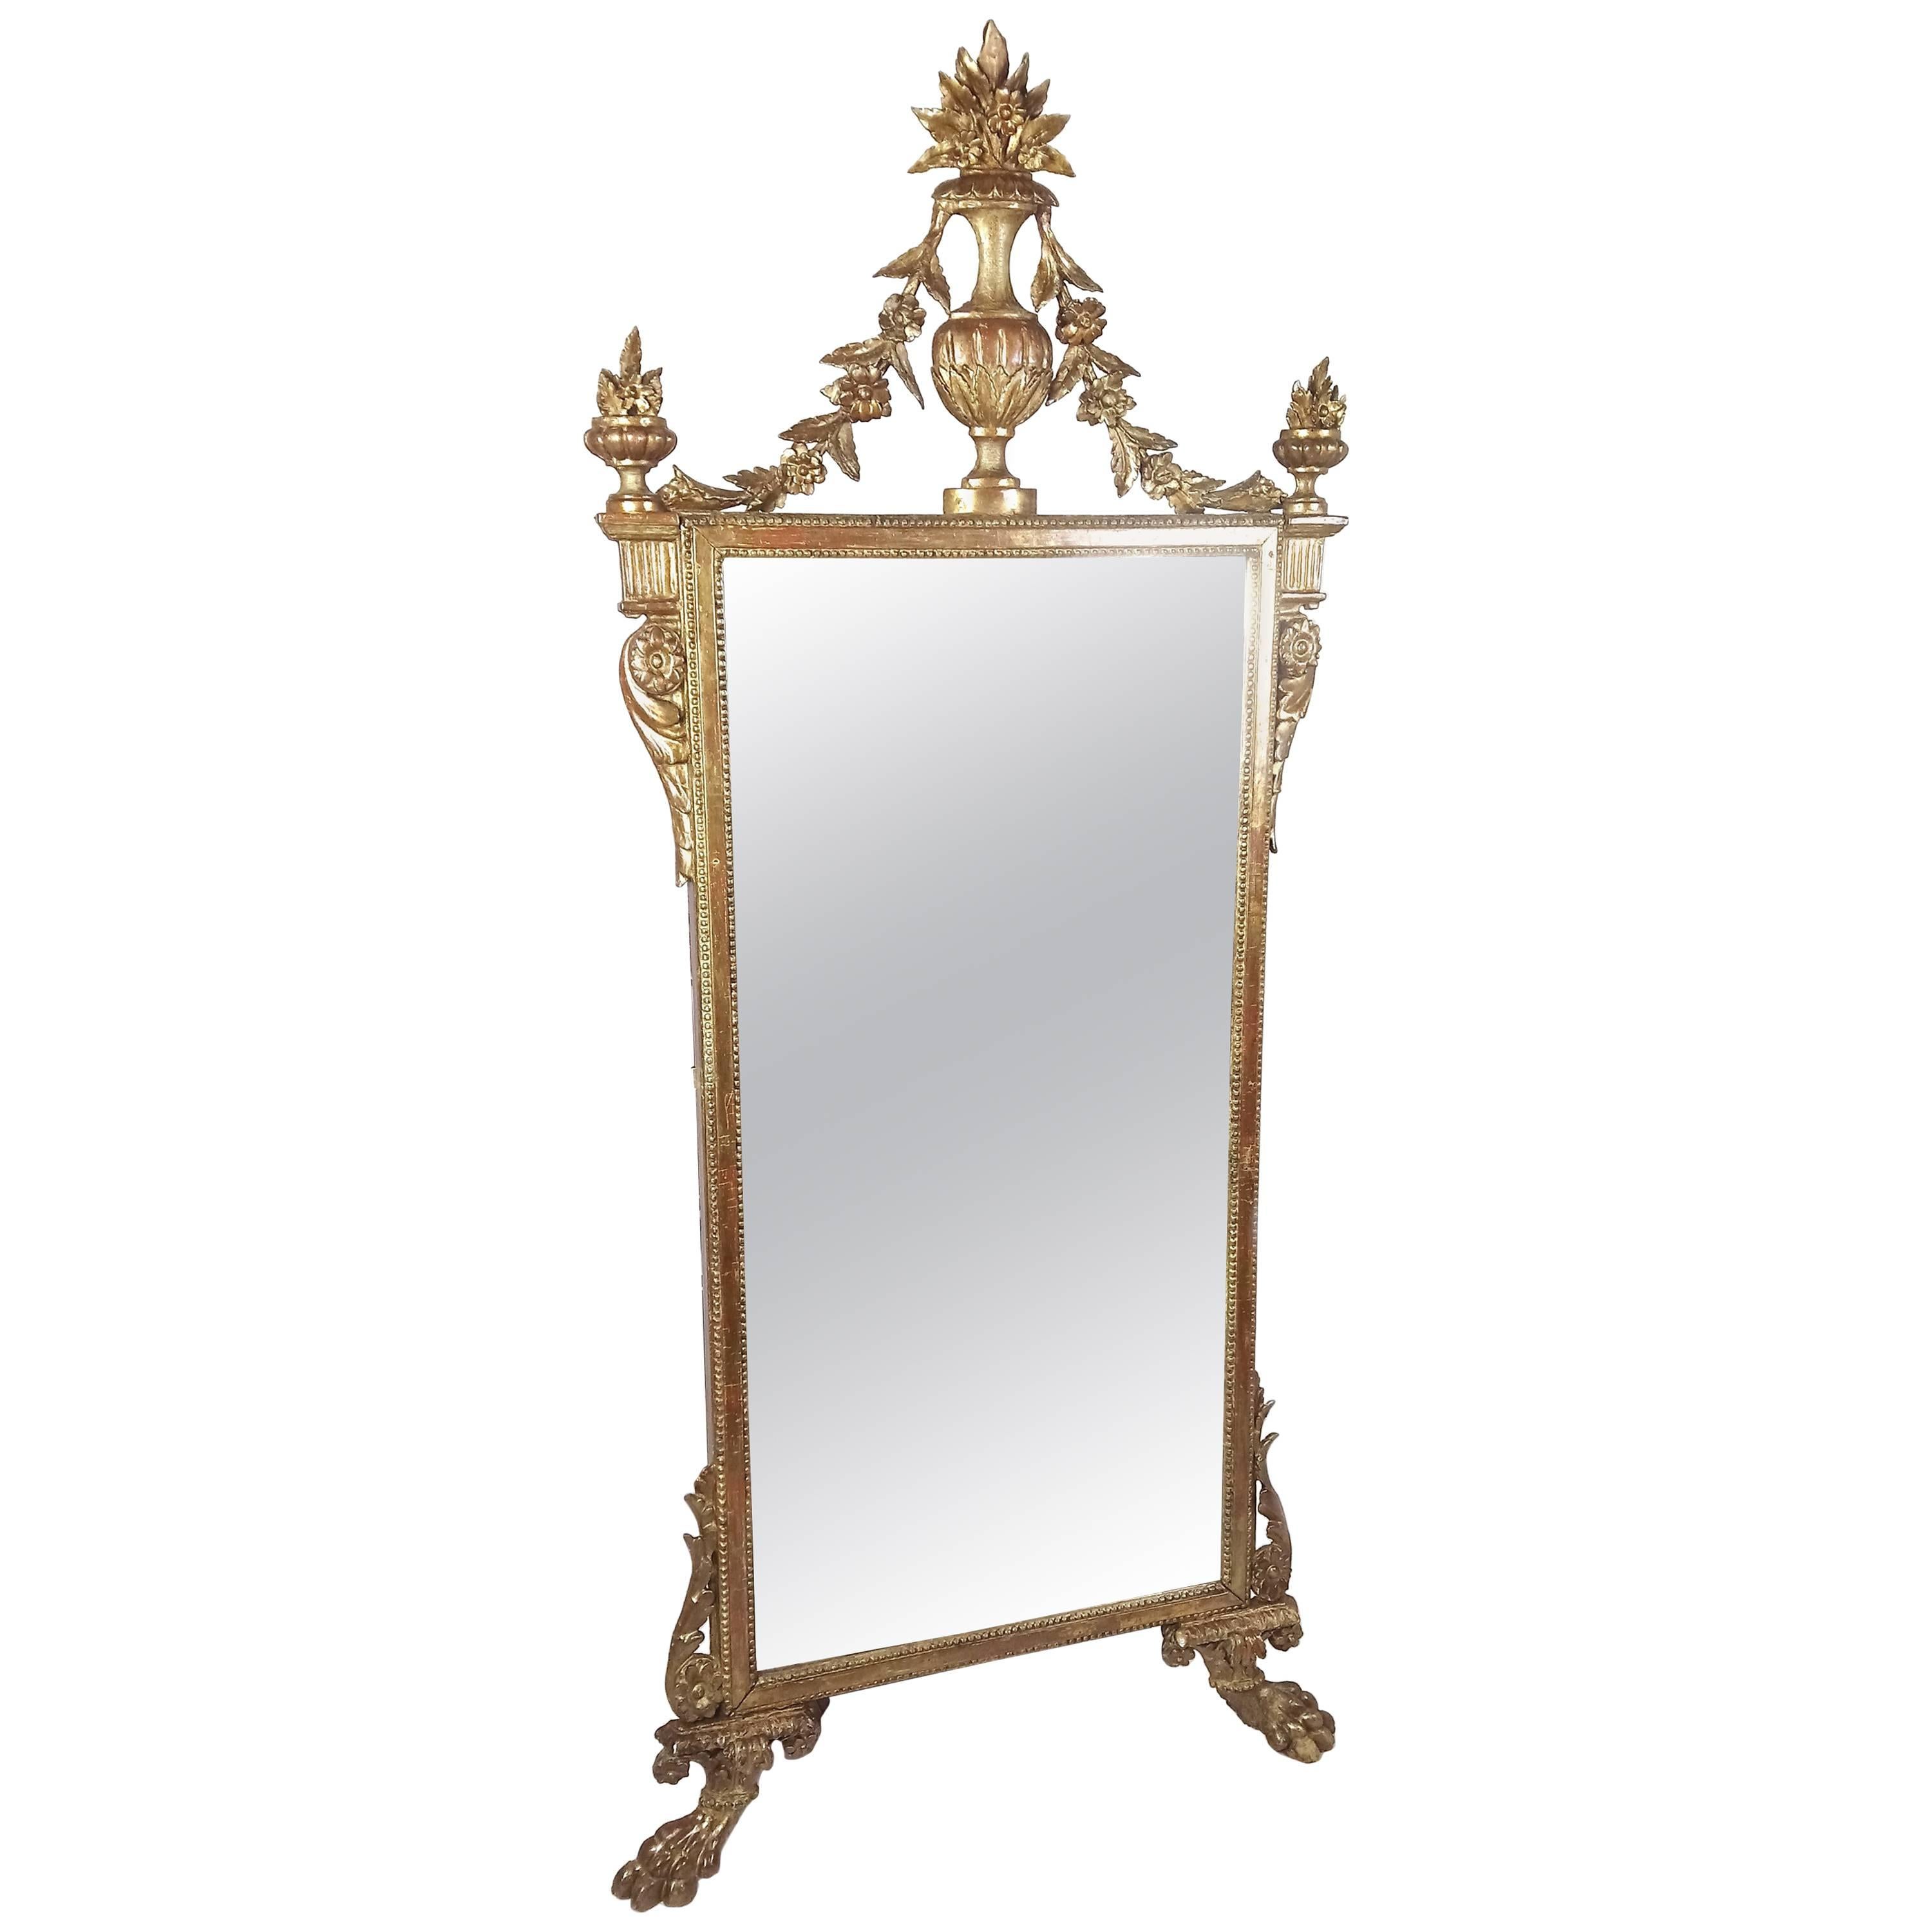 19th Century French Carved Giltwood Wall Mirror